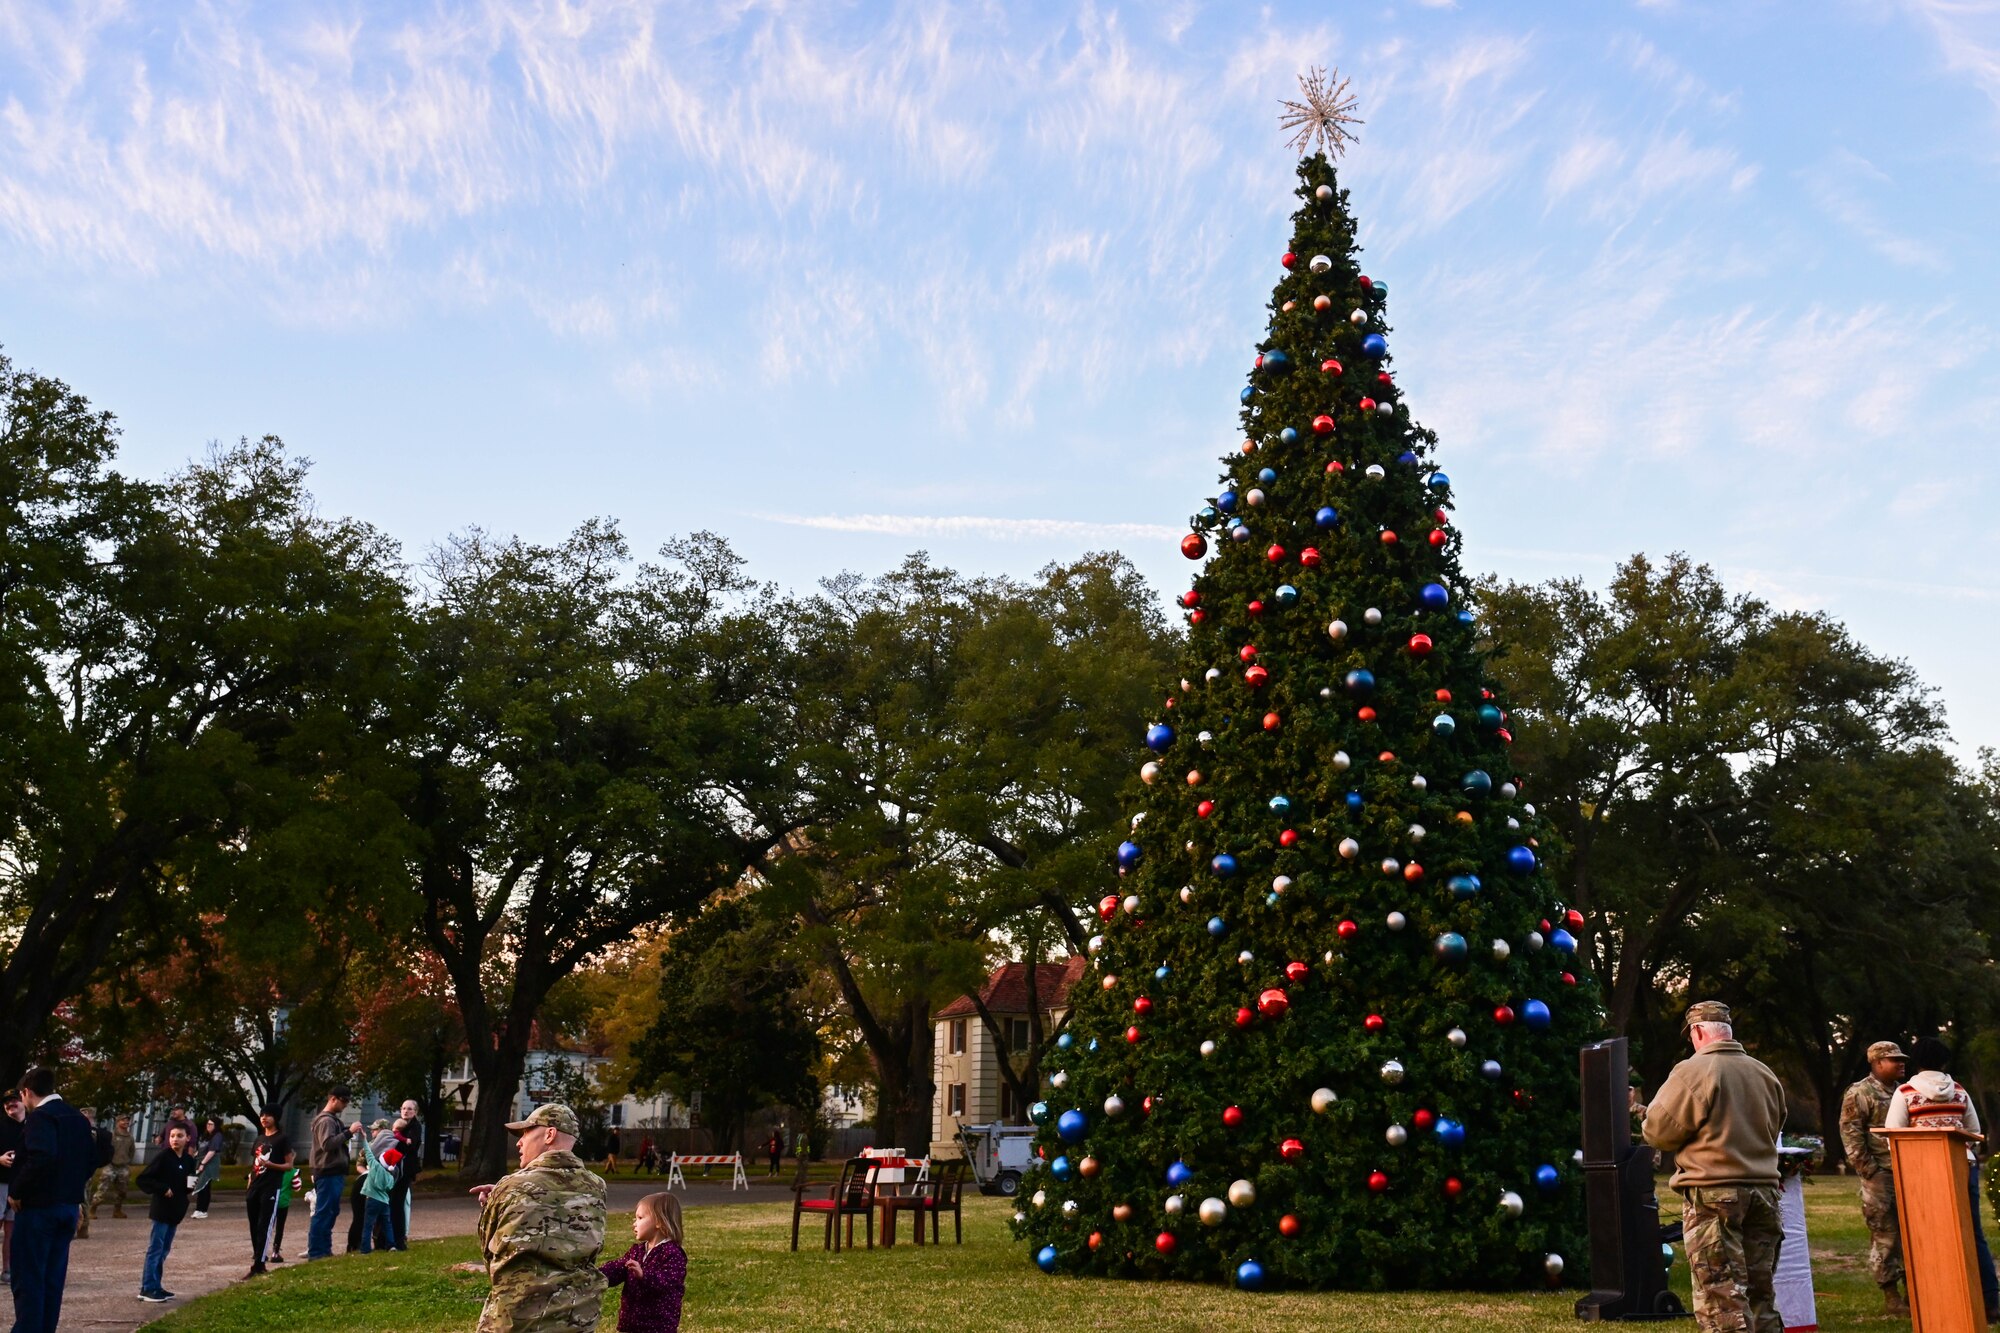 A 38-foot tall Christmas tree standing outside